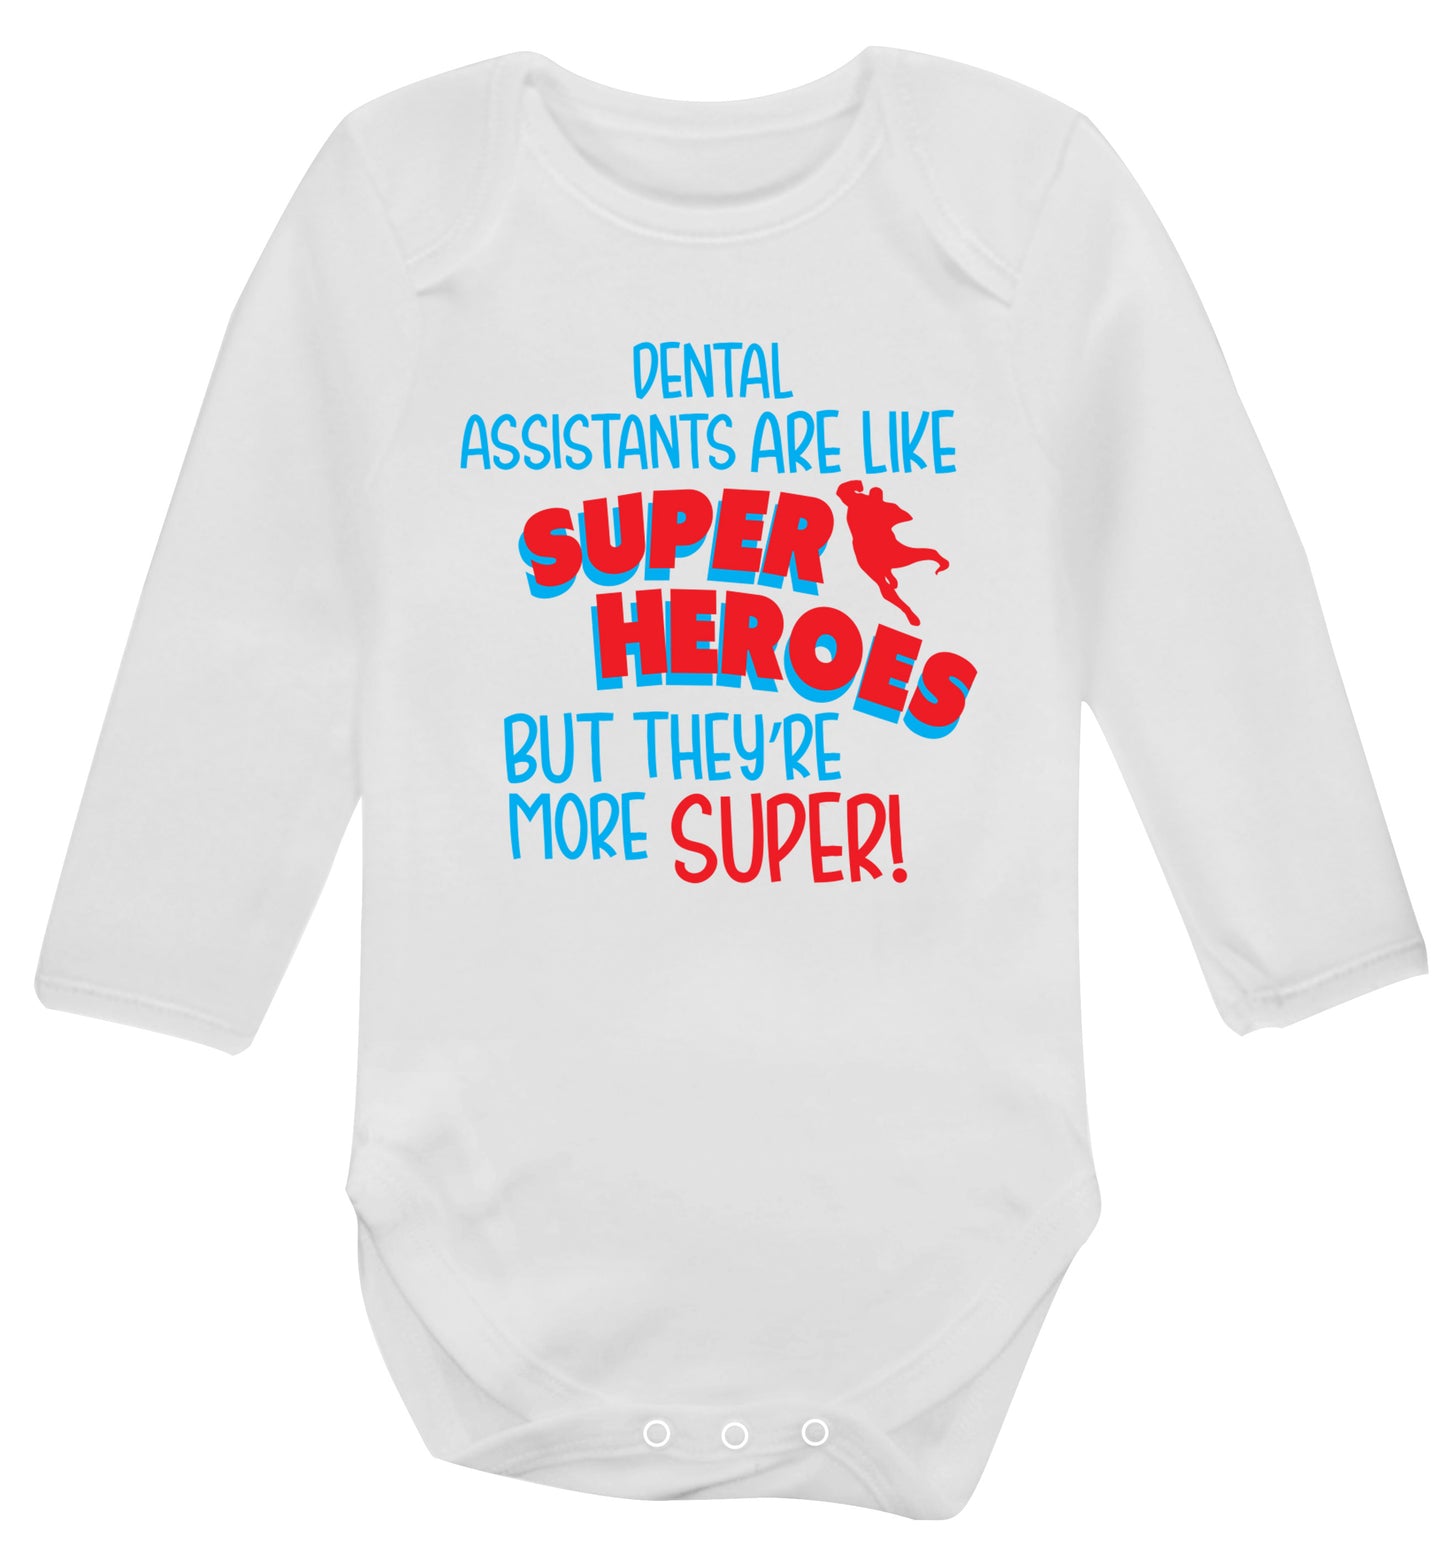 Dental Assistants are like superheros but they're more super Baby Vest long sleeved white 6-12 months